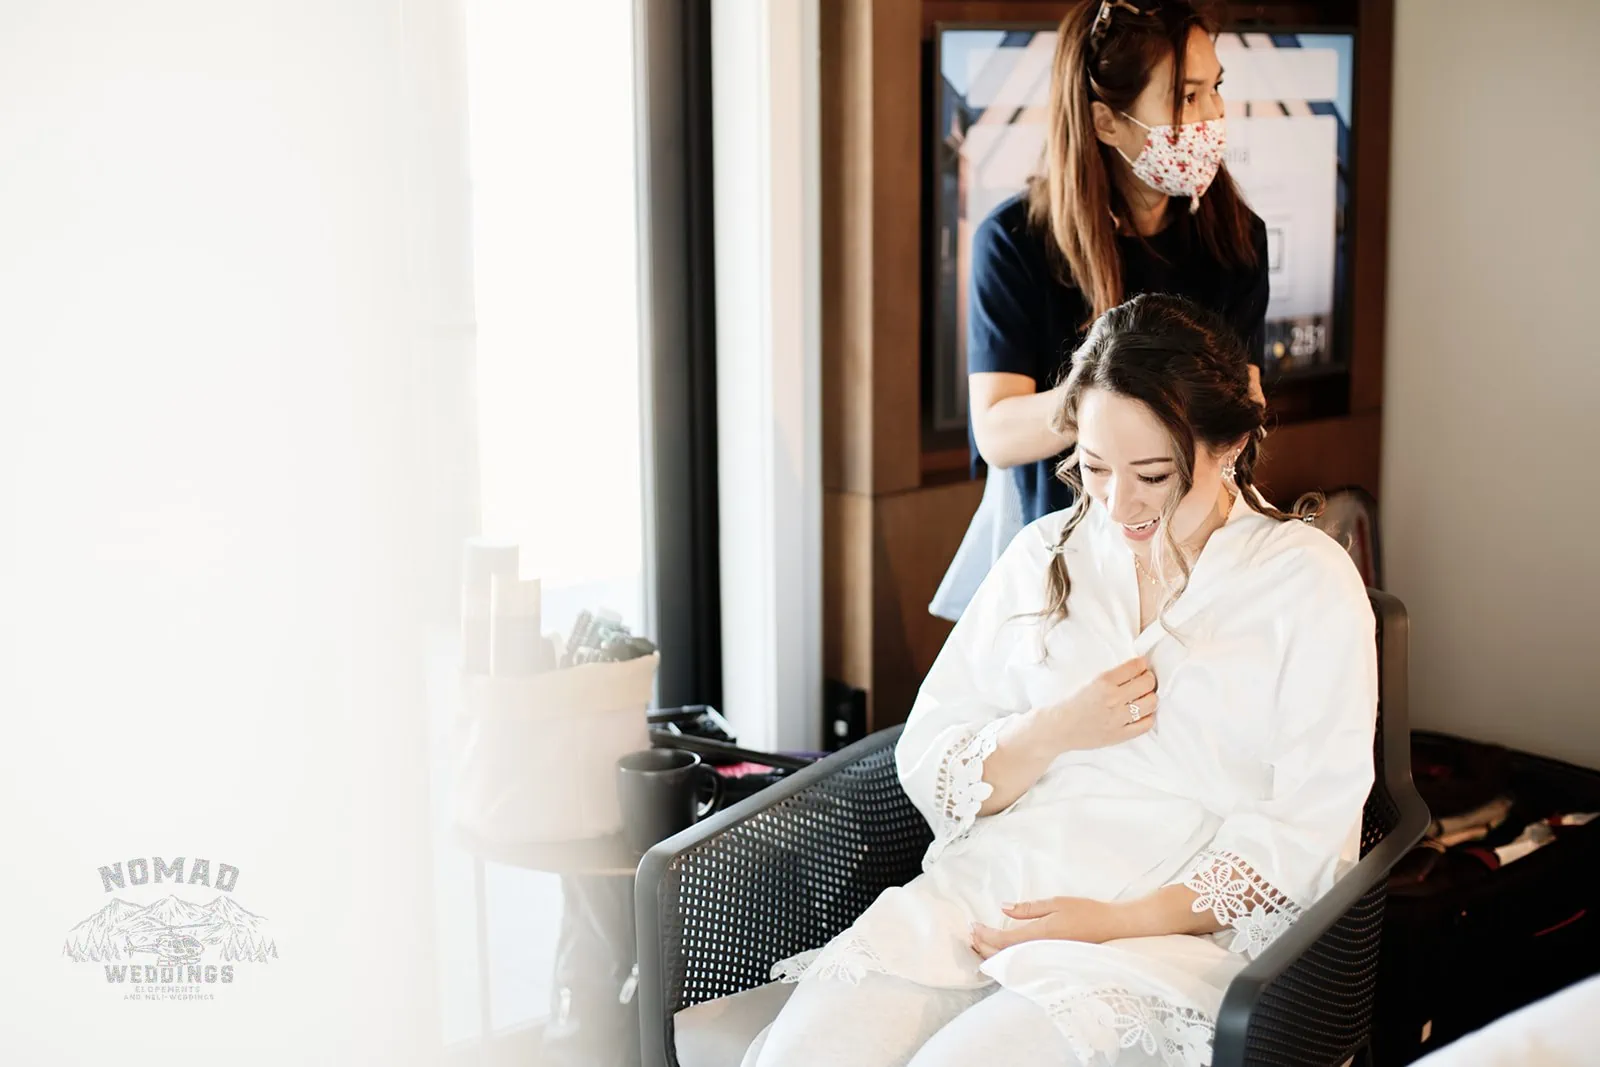 A woman getting her hair done in a hotel room for an enchanting wedding.